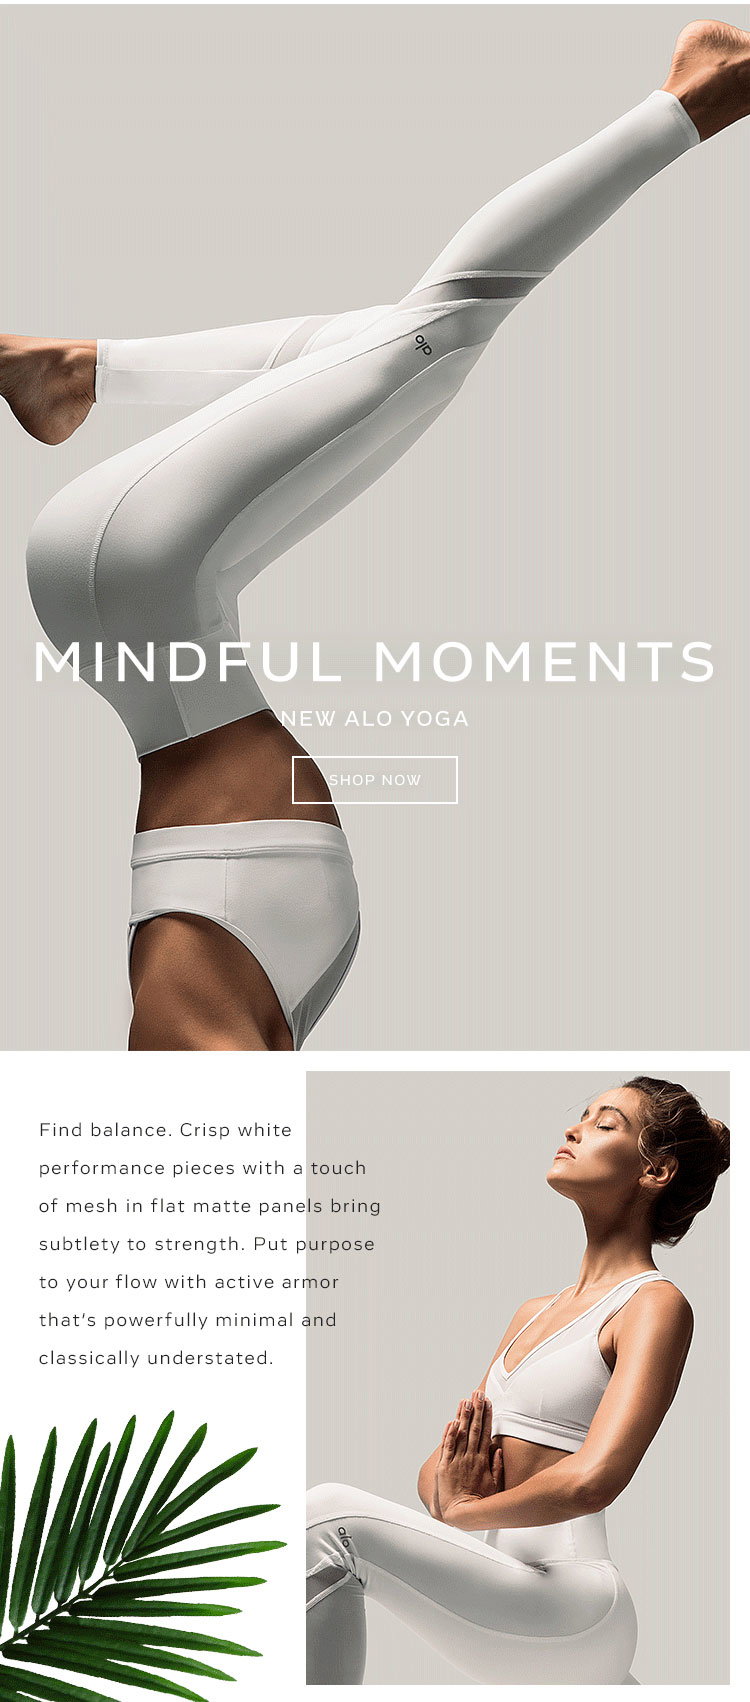 Carbon38: Mindful Moments: New Alo Yoga